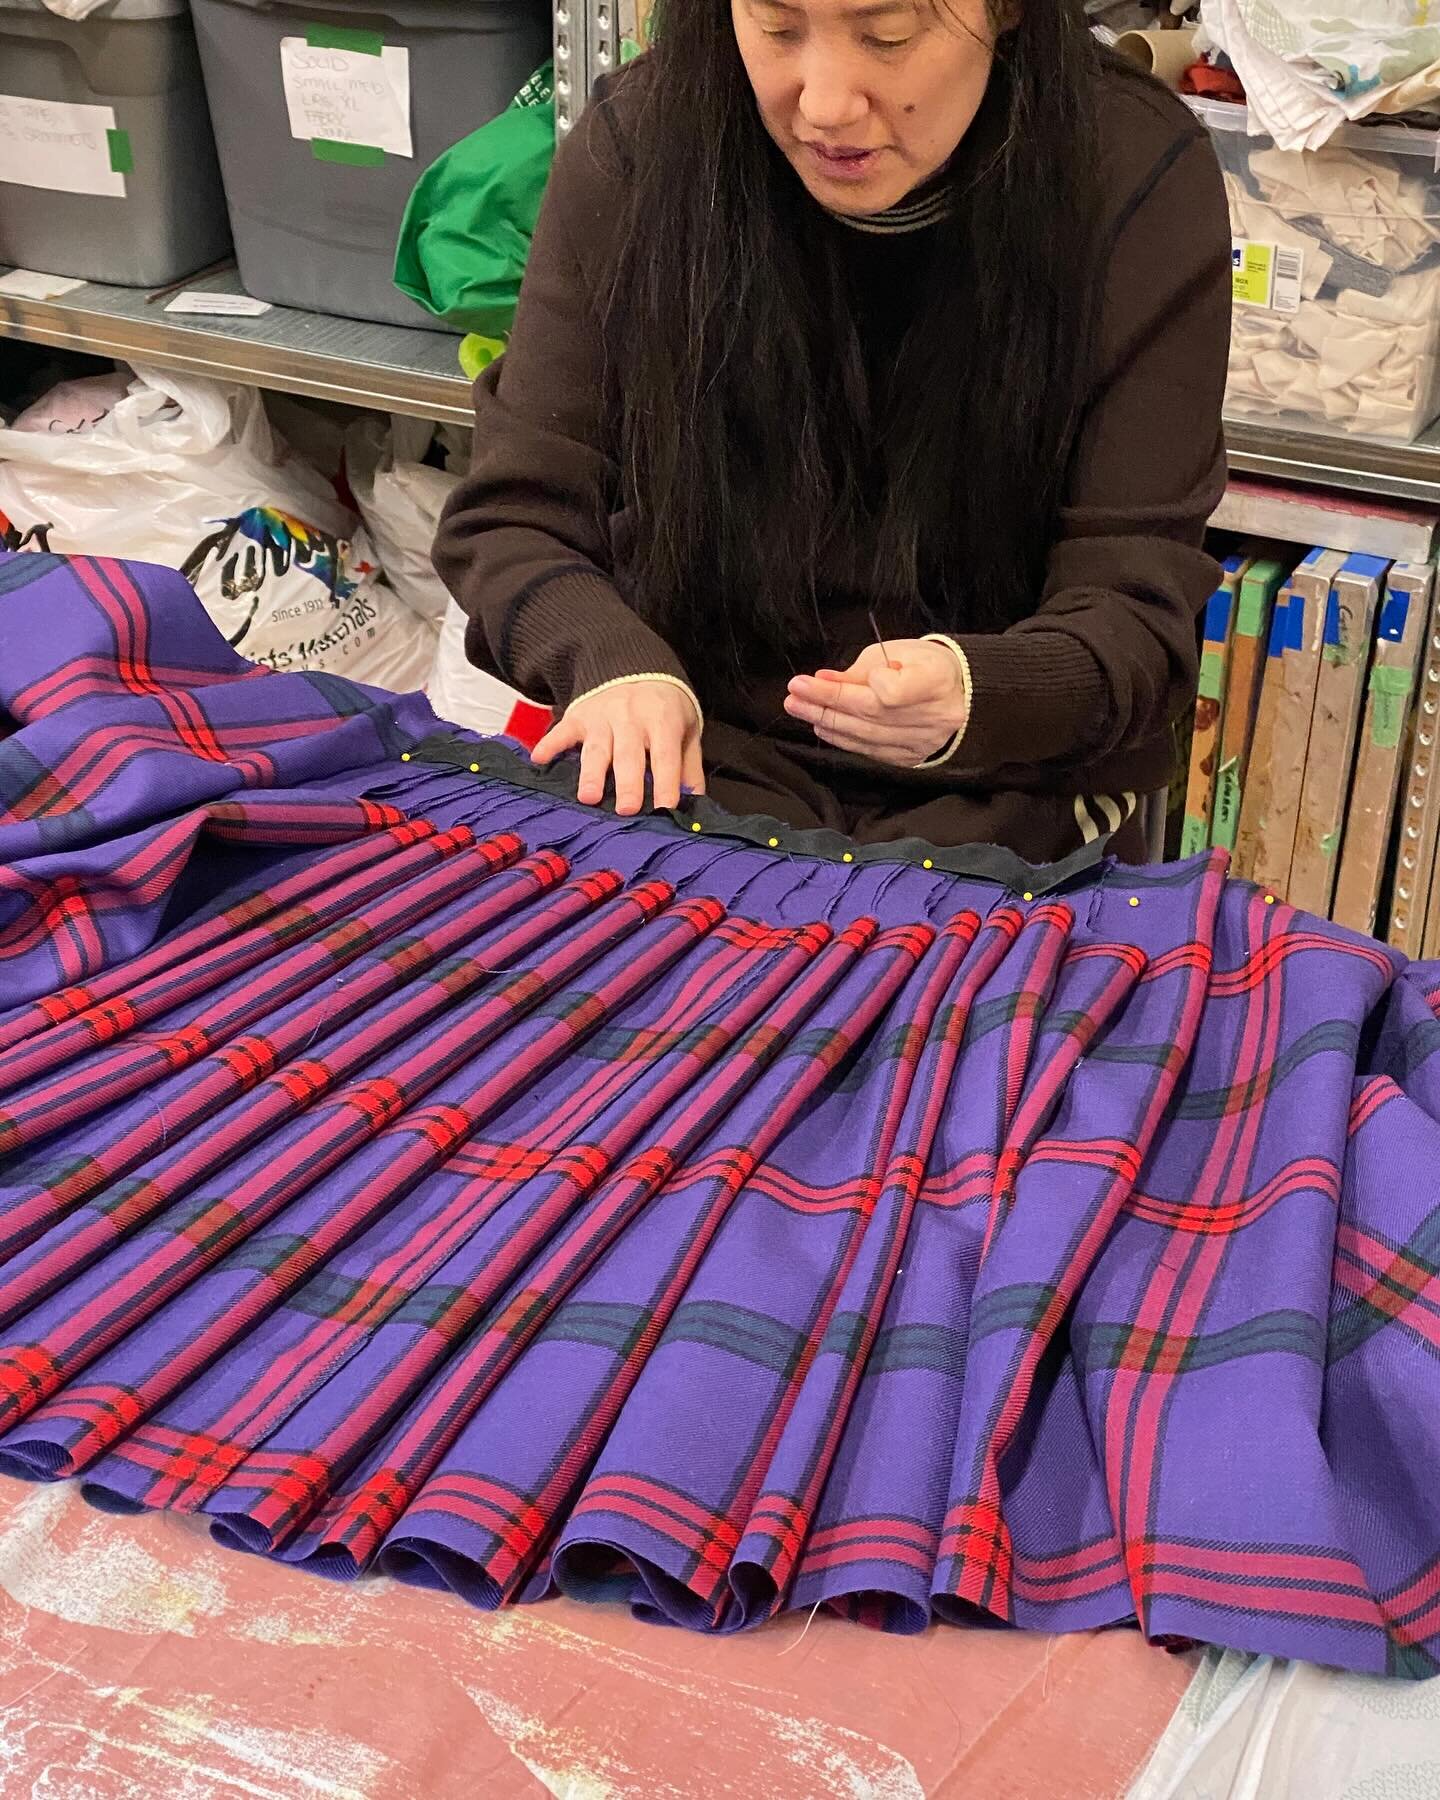 Feeling the #kiltlove today @textile_studio with my students - they&rsquo;re well down their kiltmaking path now! Want to join in? DM me to go on the list to be notified when the next class is!
#handmadeintoronto #kilt #kiltmakingcourse